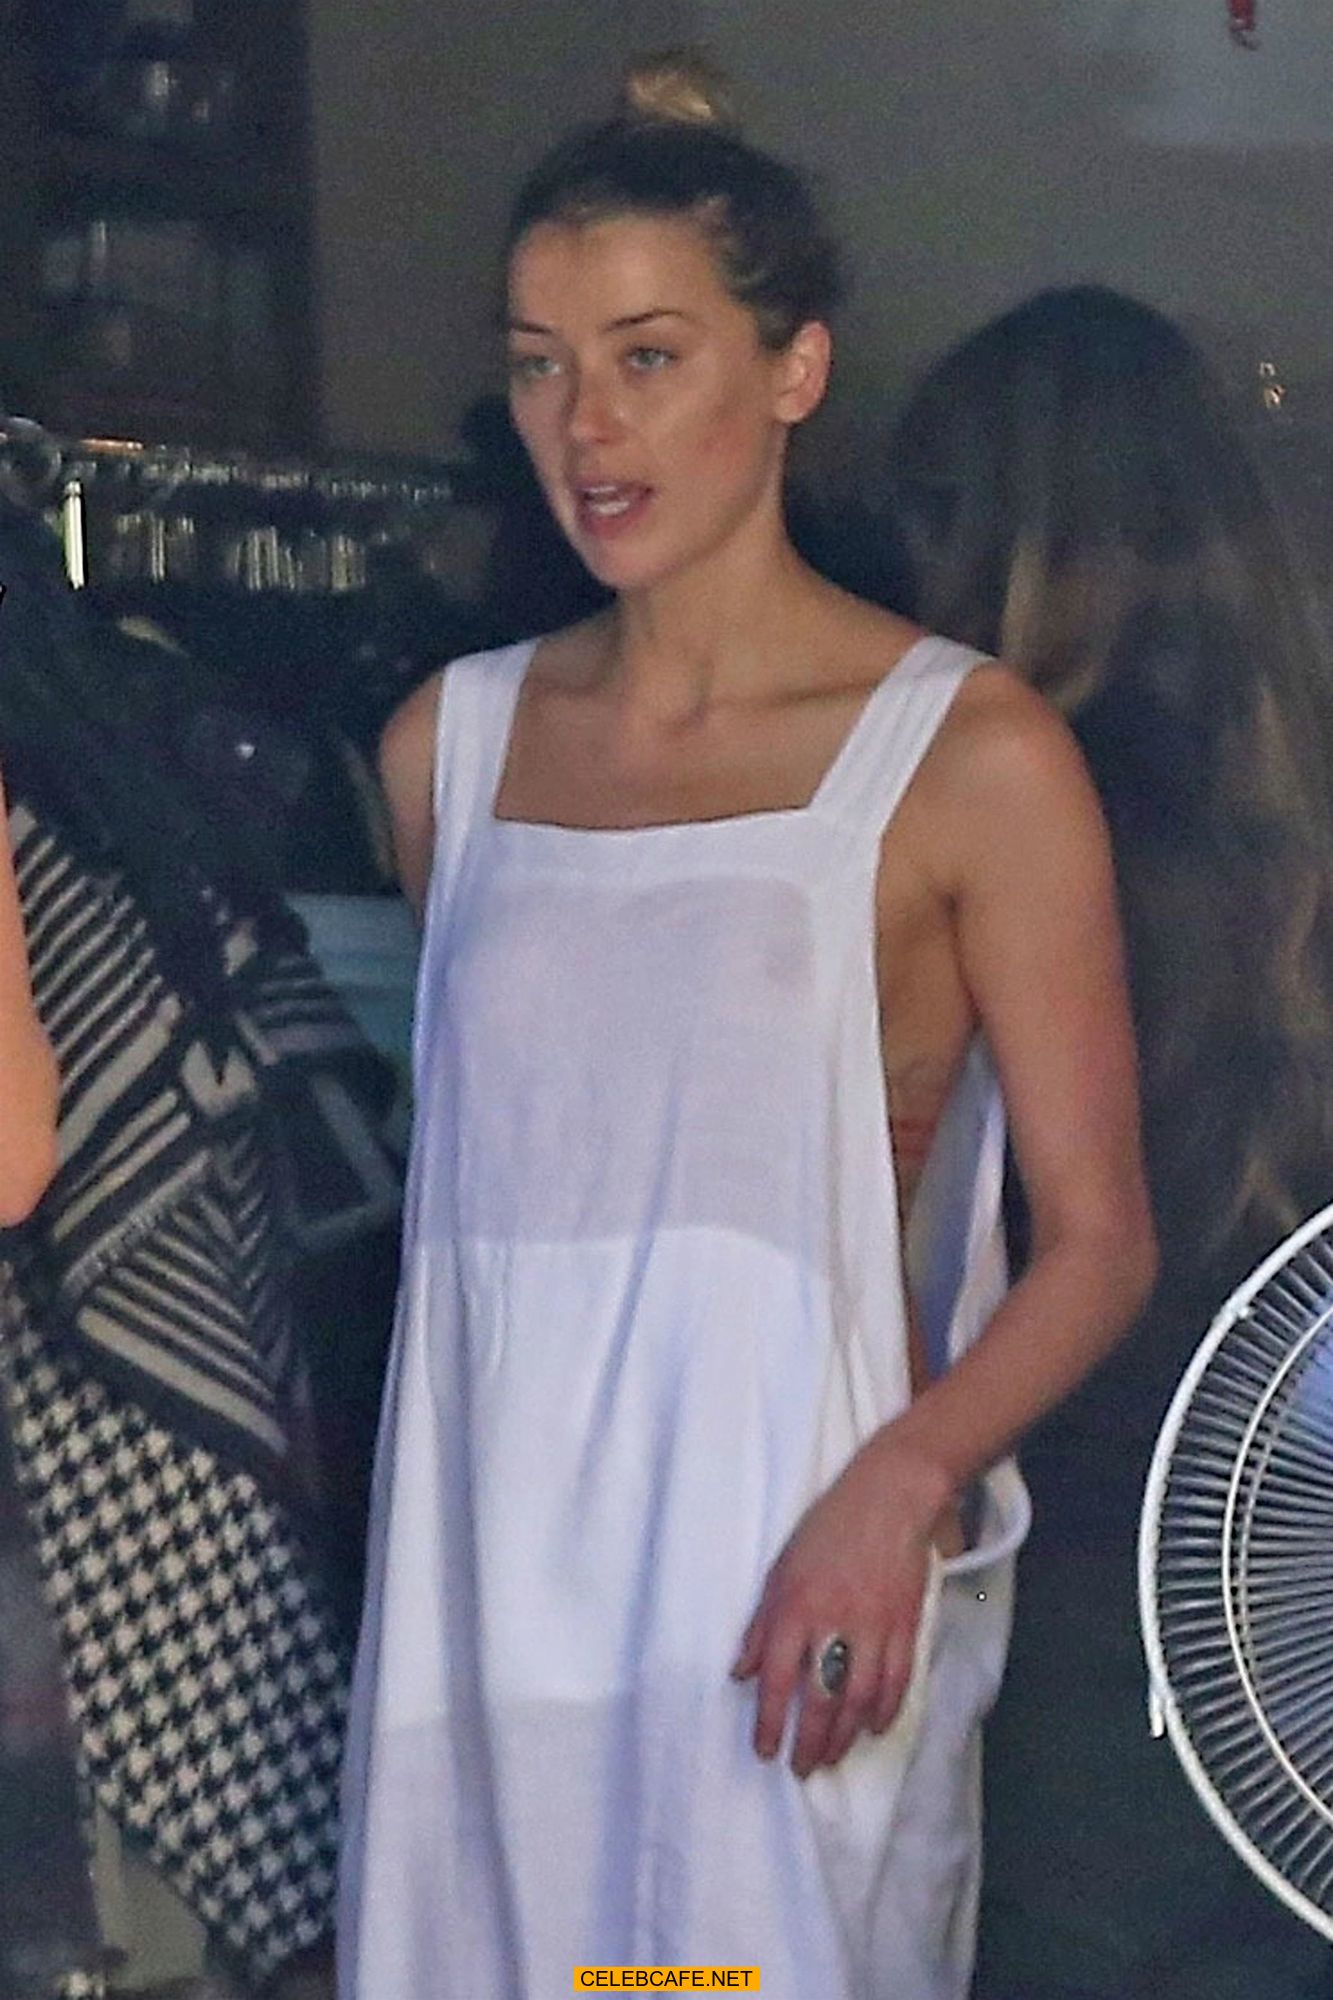 amber_heard_has_a_nip-slip_while_cleaning_out_her_garage_in_la_07302018_12.jpg